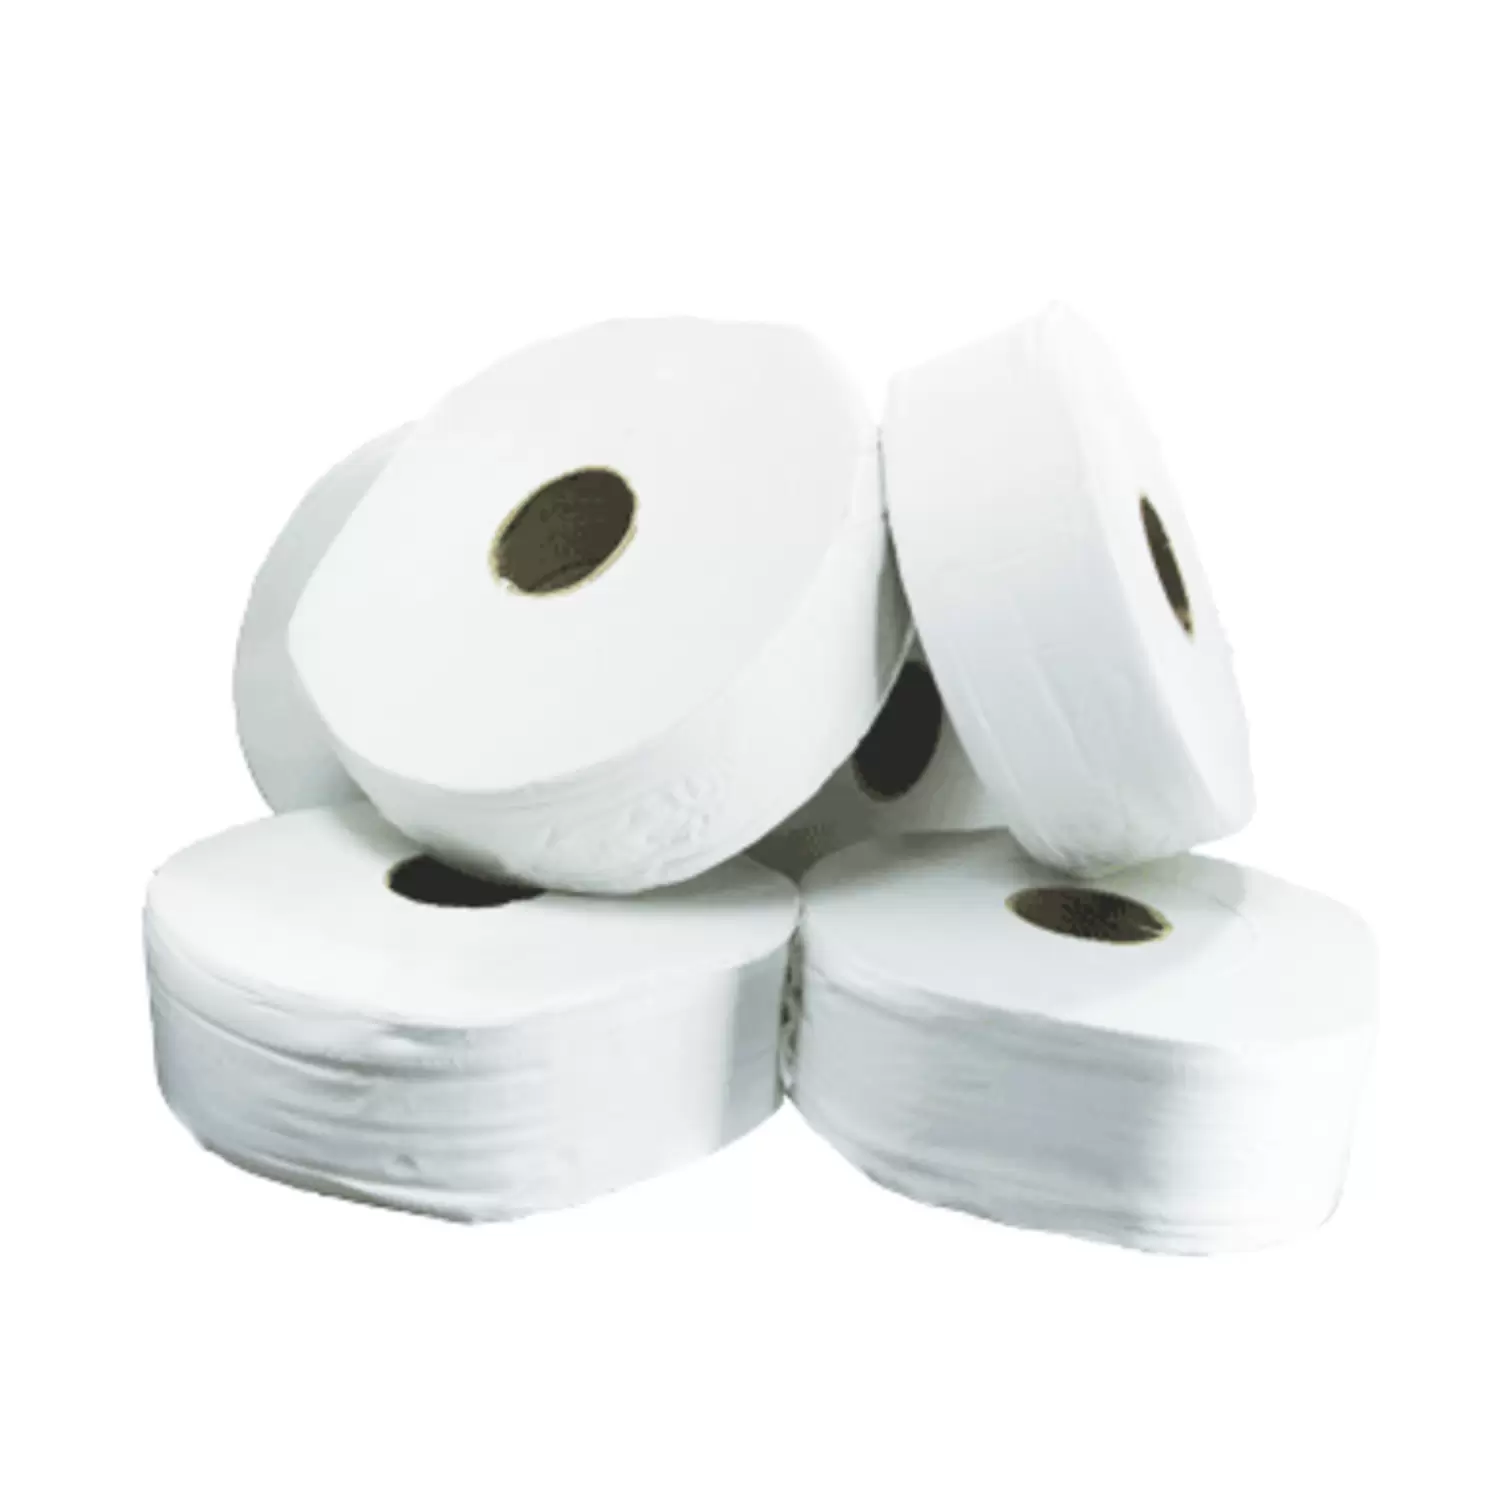 Soclean Jumbo Toilet Rolls 300m 2ply 6 Pack - Gompels - Care